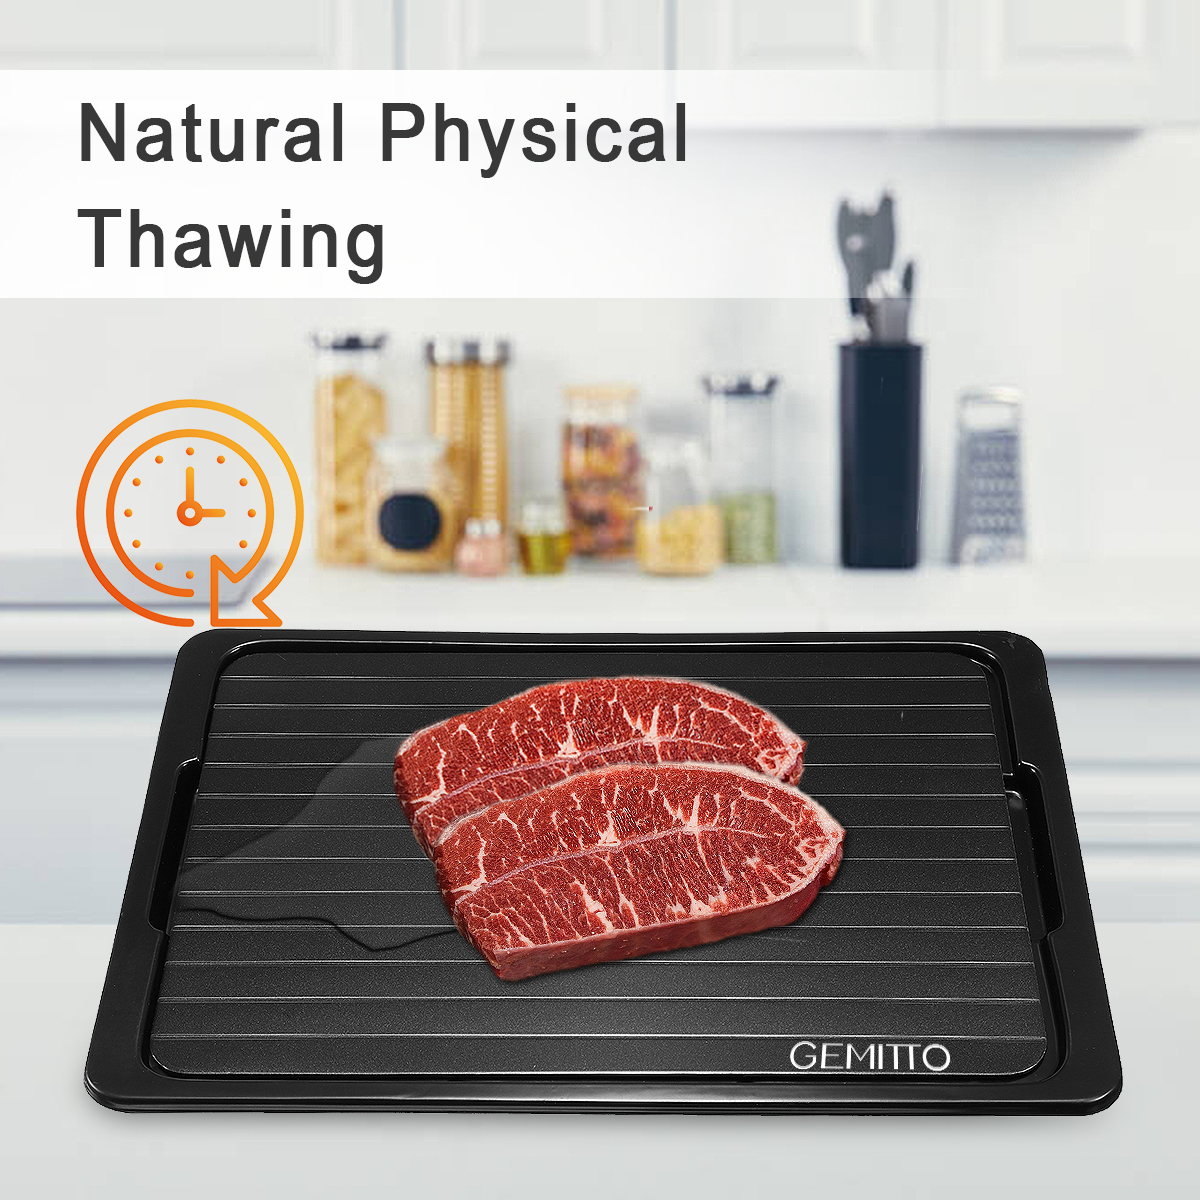 Defrosting-Tray-Thawing-Plate-Frozen-Food-Faster-and-Safer-Way-to-Defrost-Meat-or-Frozen-Food-Plate-1344447-10